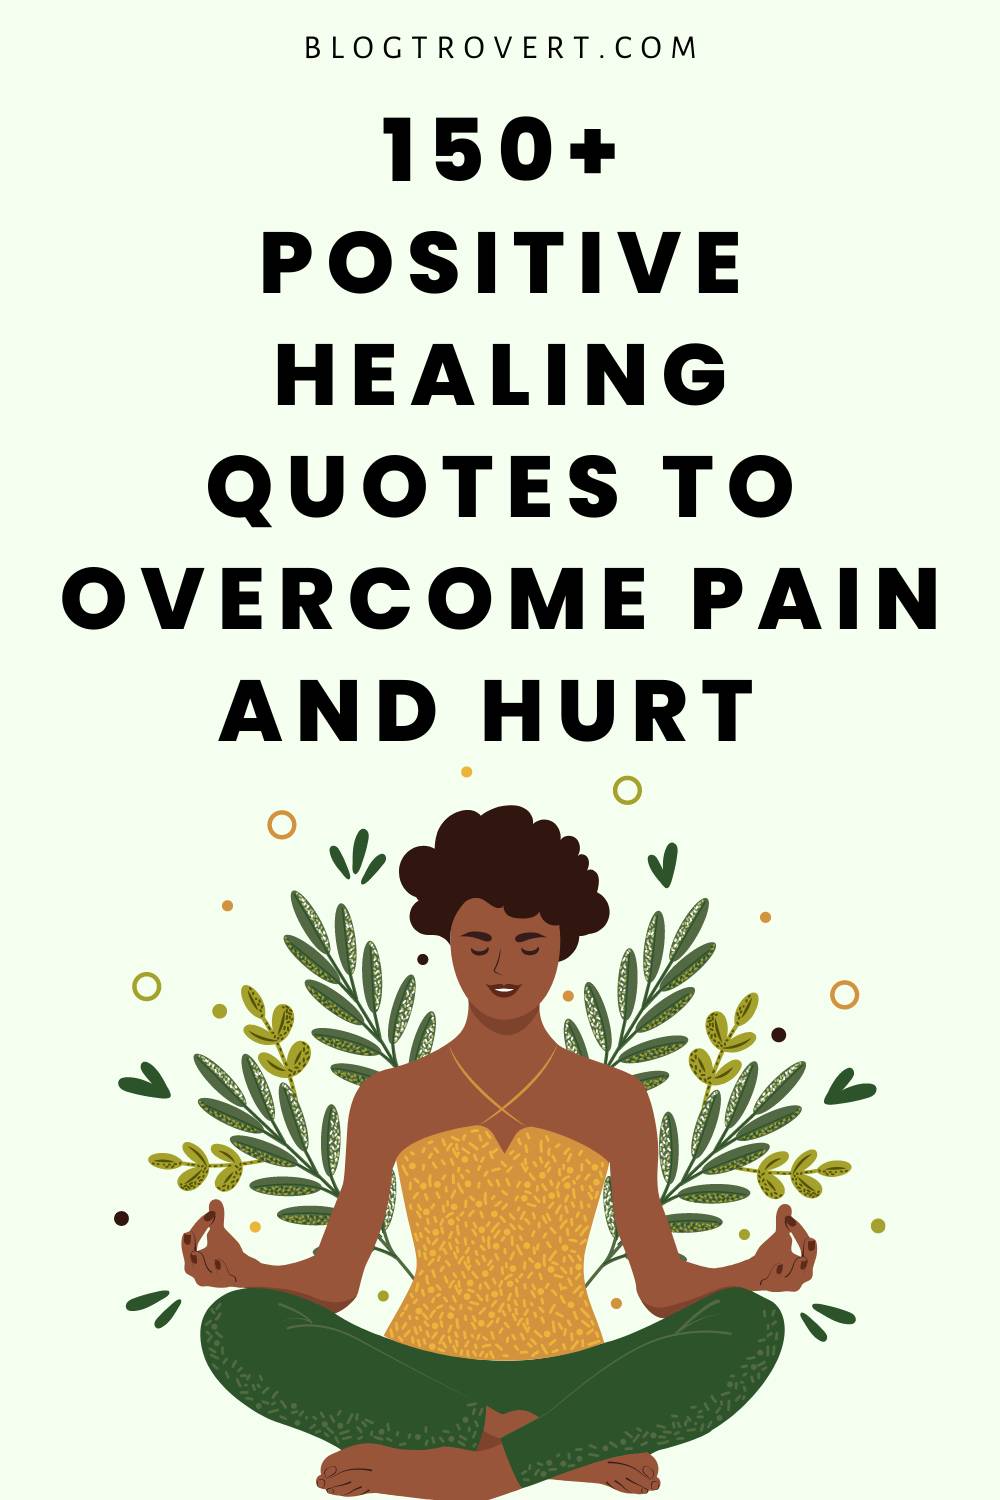 151 Positive Healing Quotes To Overcome Pain And Hurt